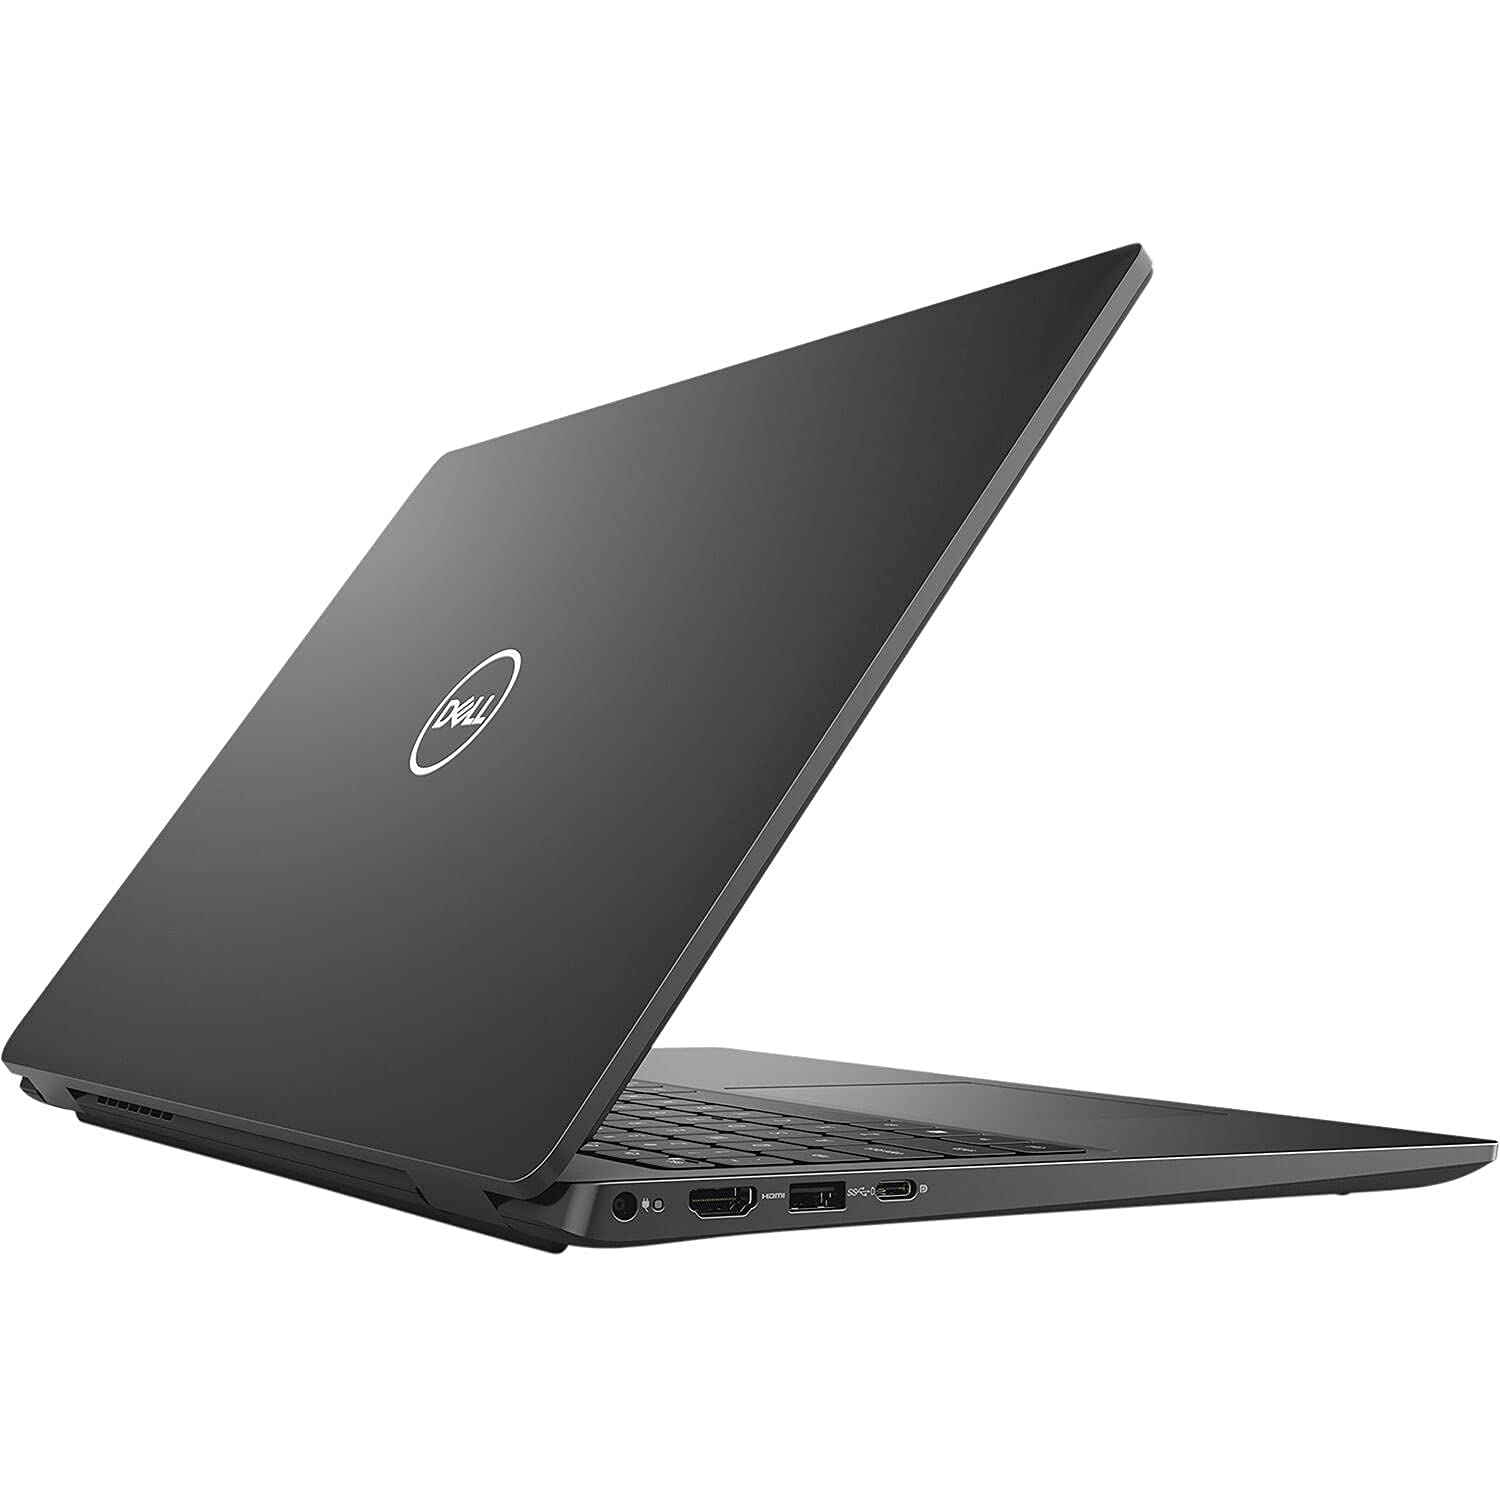 Dell Latitude 3520 15.6" FHD Business Laptop Computer, Intel Quad-Core i7-1165G7 up to 4.7GHz, 64GB DDR4 RAM, 2TB PCIe SSD, WiFi 6, Bluetooth 5.1, Type-C, HDMI, Windows 11 Pro